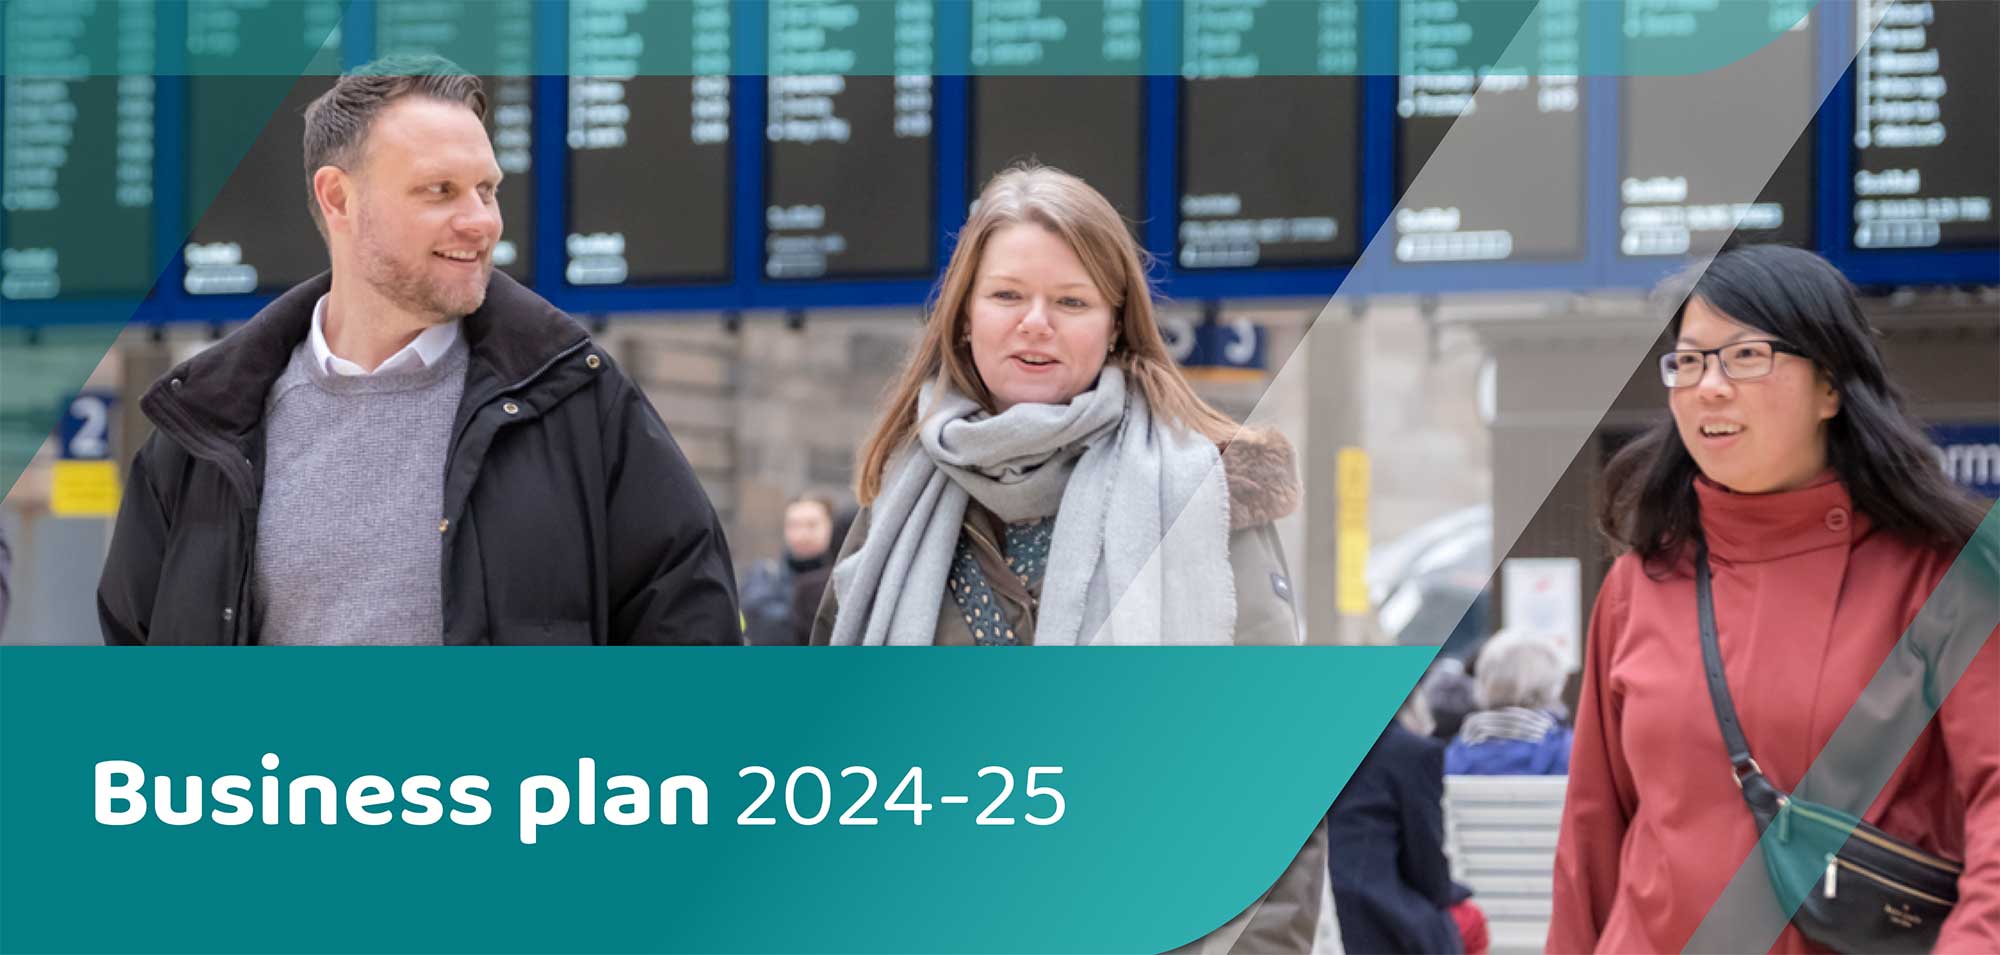 ORR business plan cover image featuring 3 people walking through a railway station.